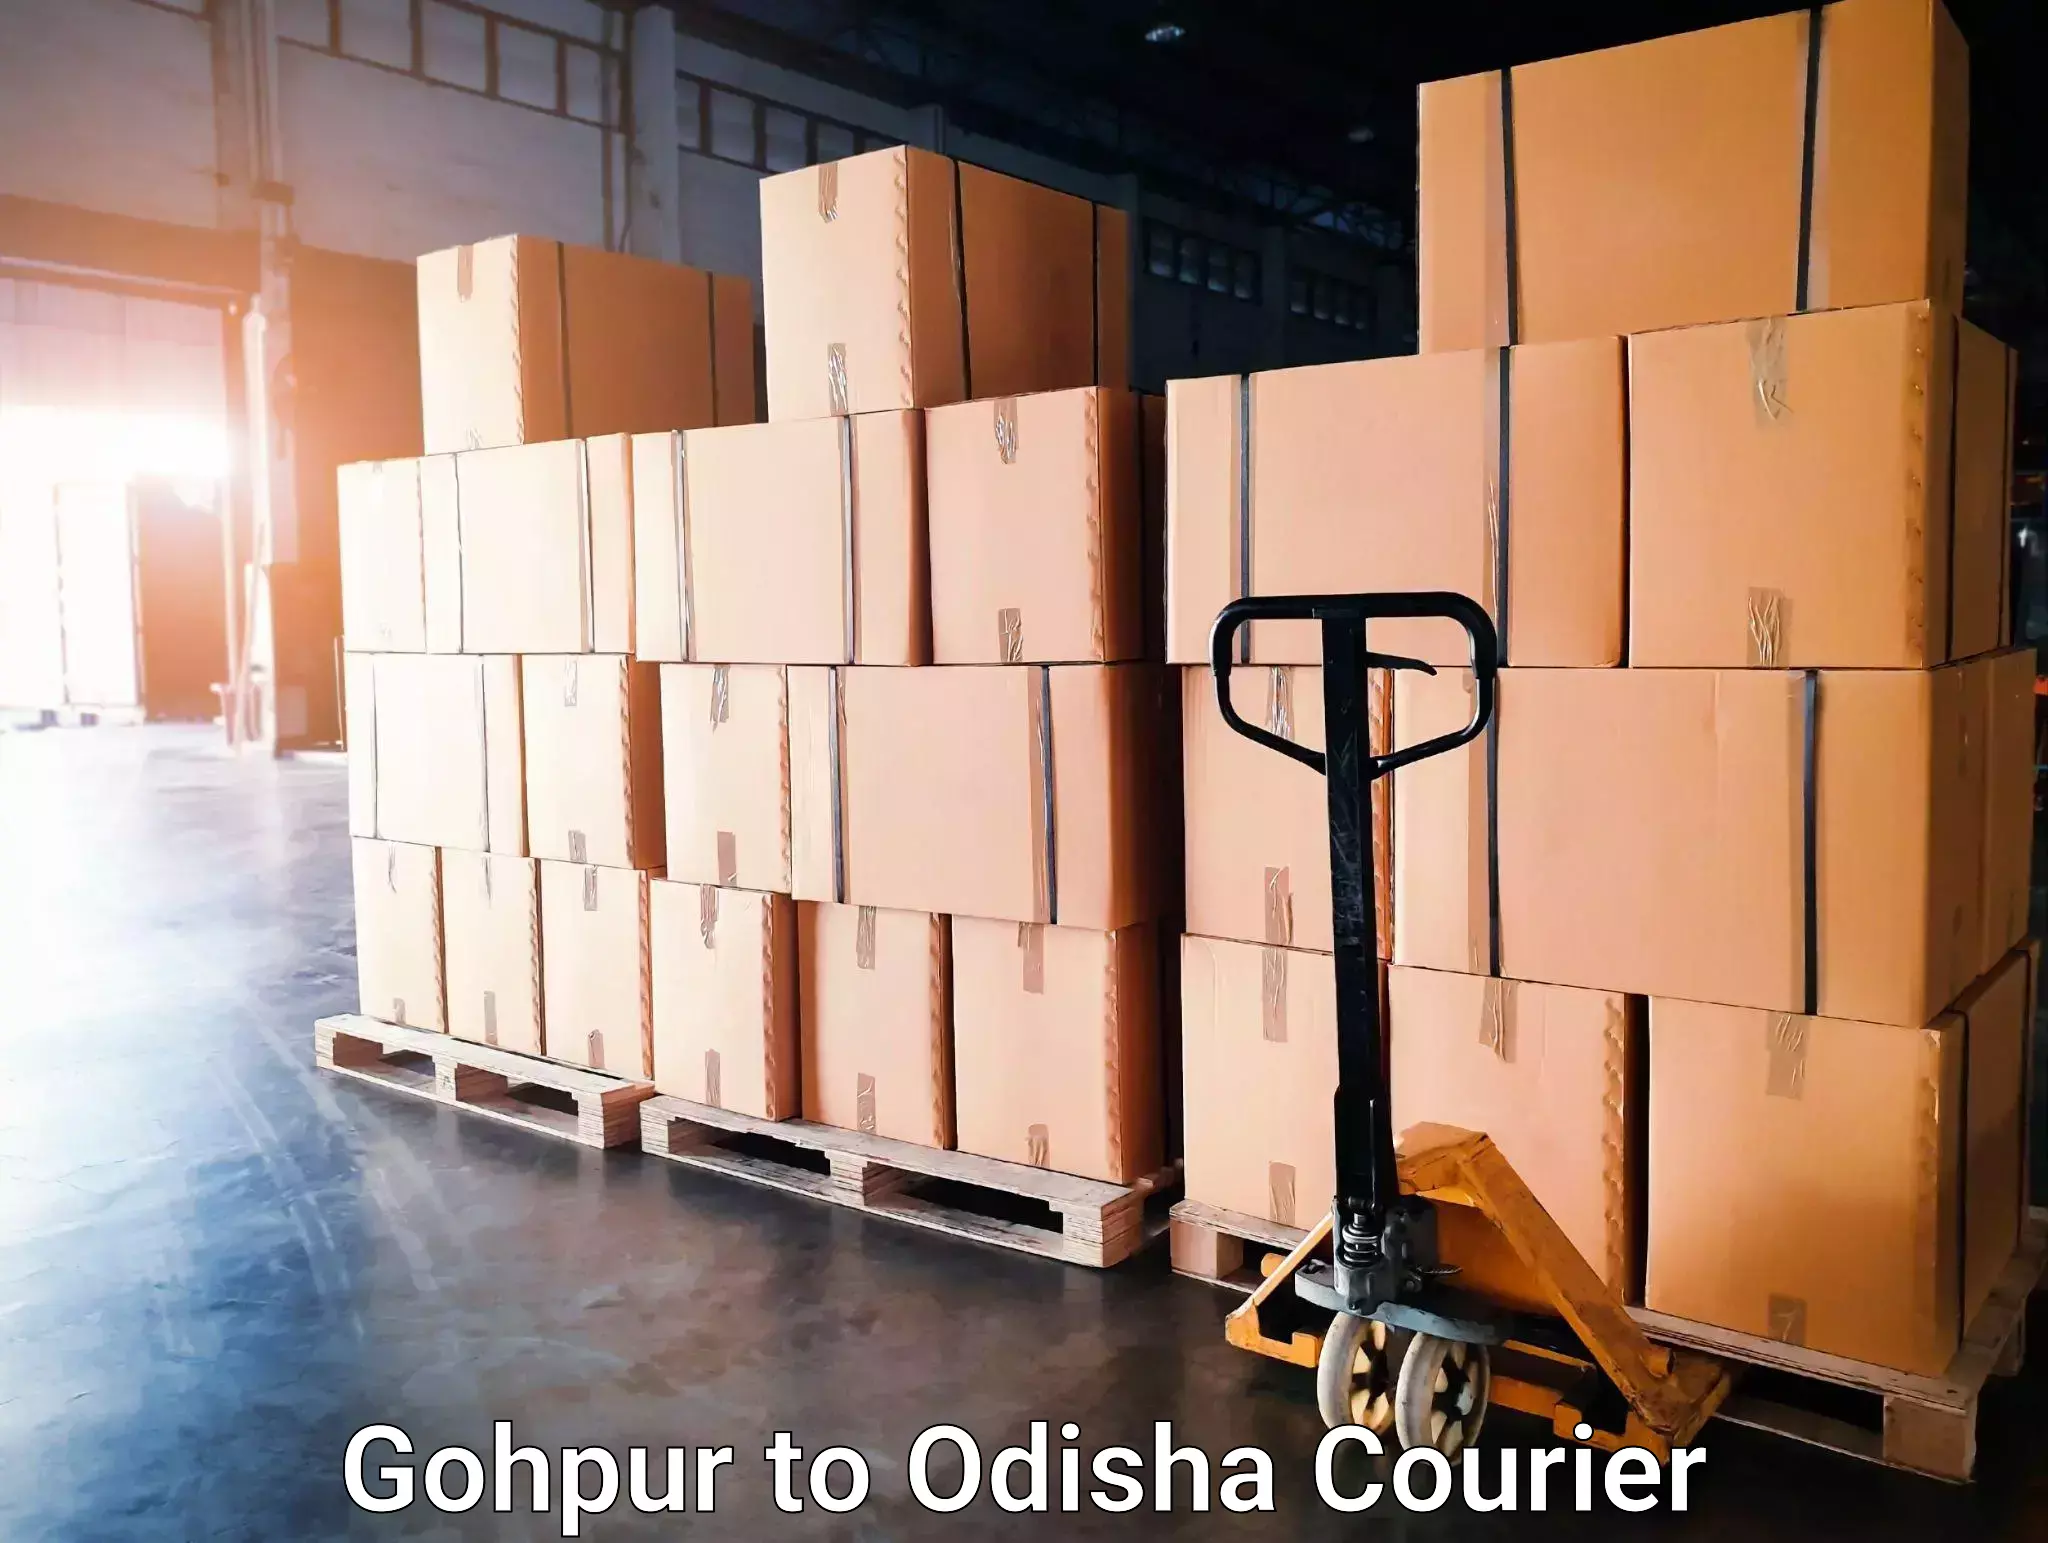 Express delivery capabilities in Gohpur to Behrampur